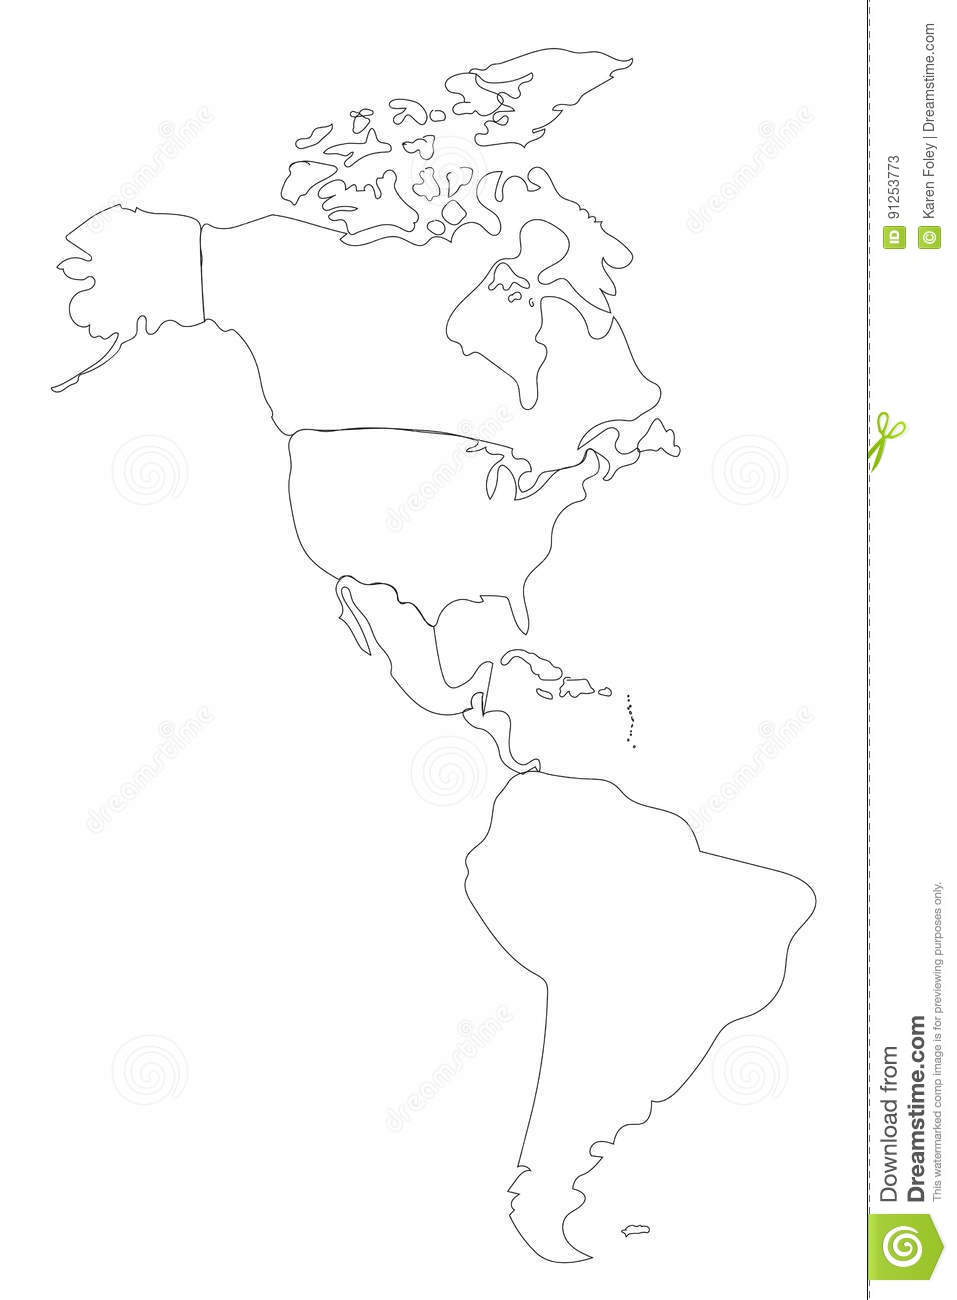 Line Vector Outline Of North And South America Stock Vector 